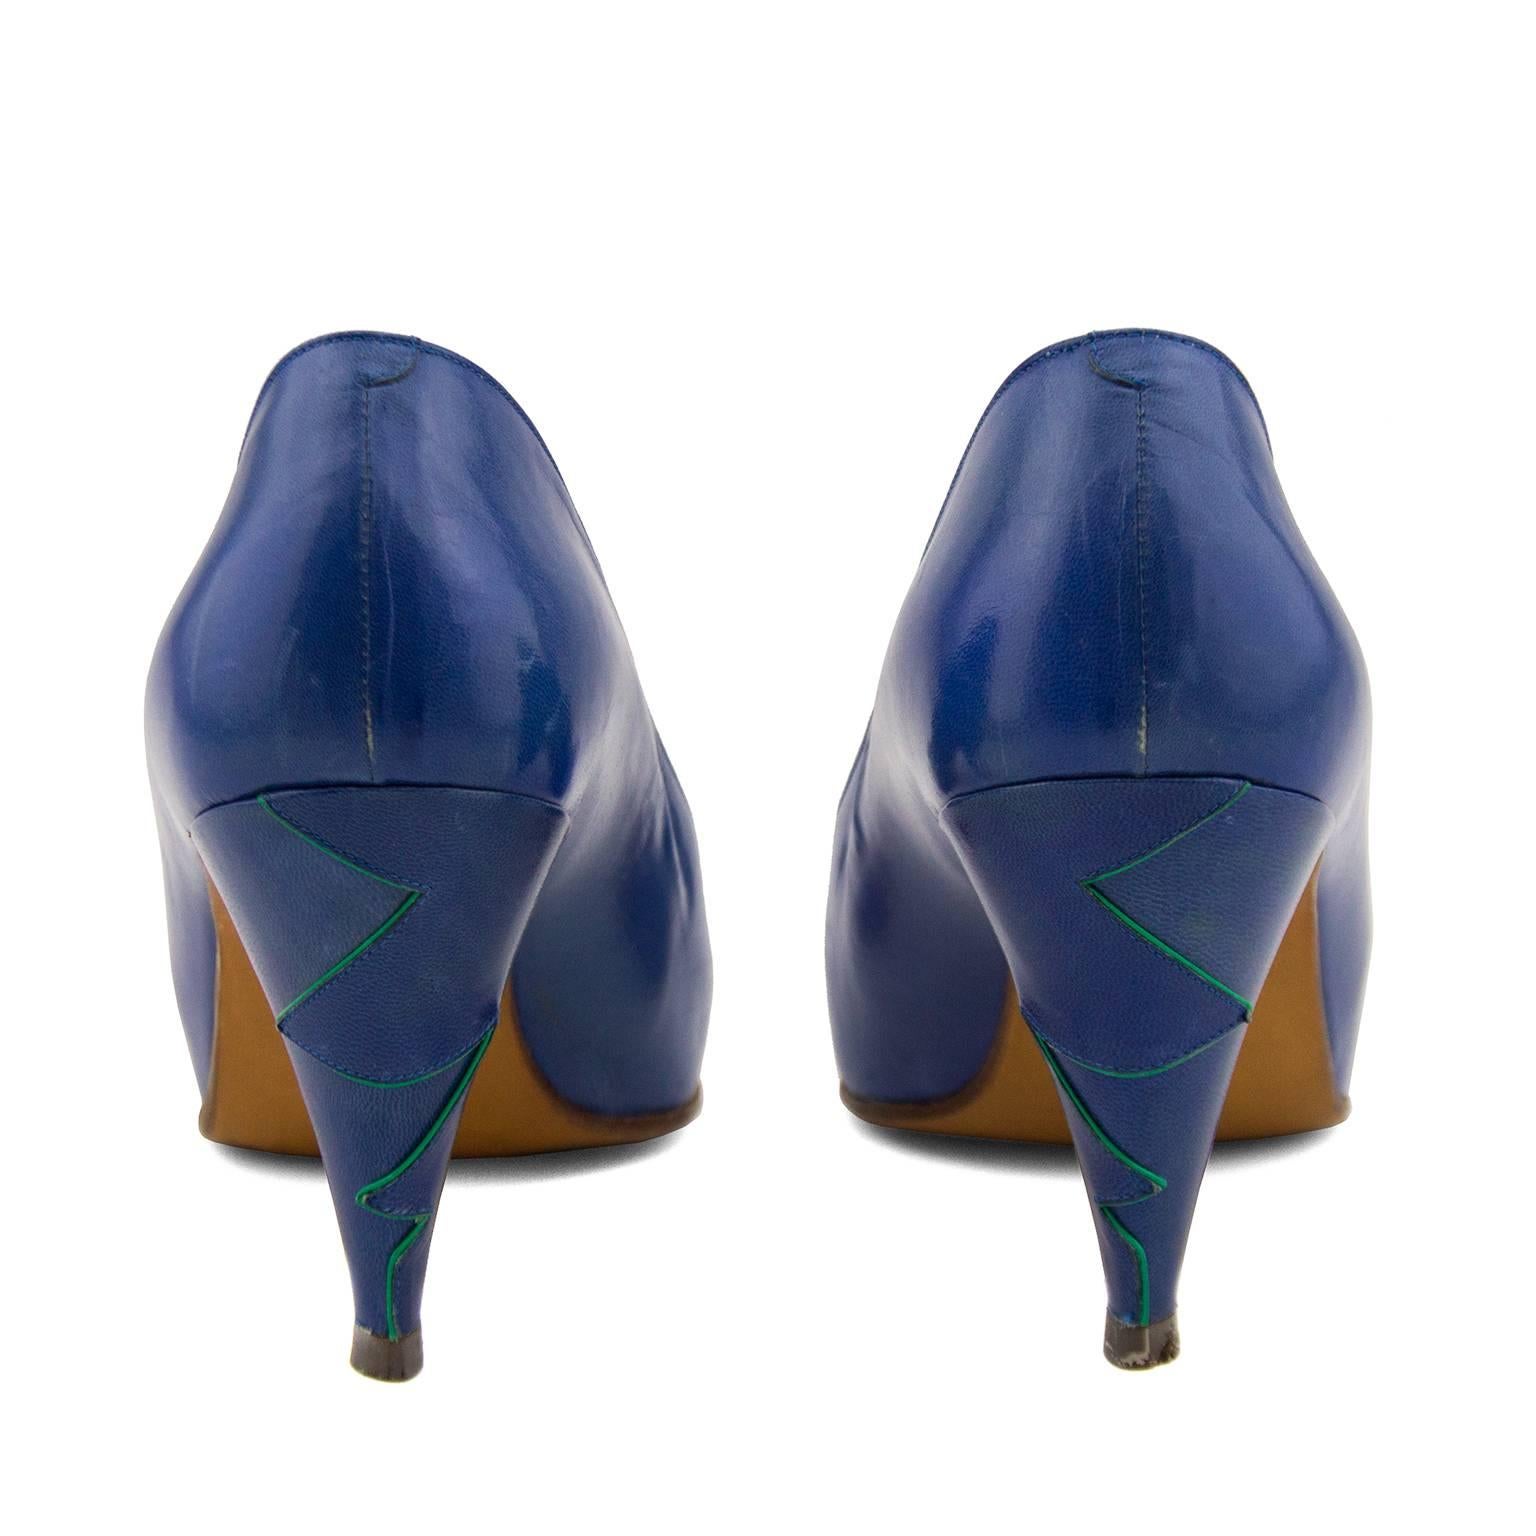 1980s Maude Frizon Blue Leather Pumps In Excellent Condition For Sale In Toronto, Ontario